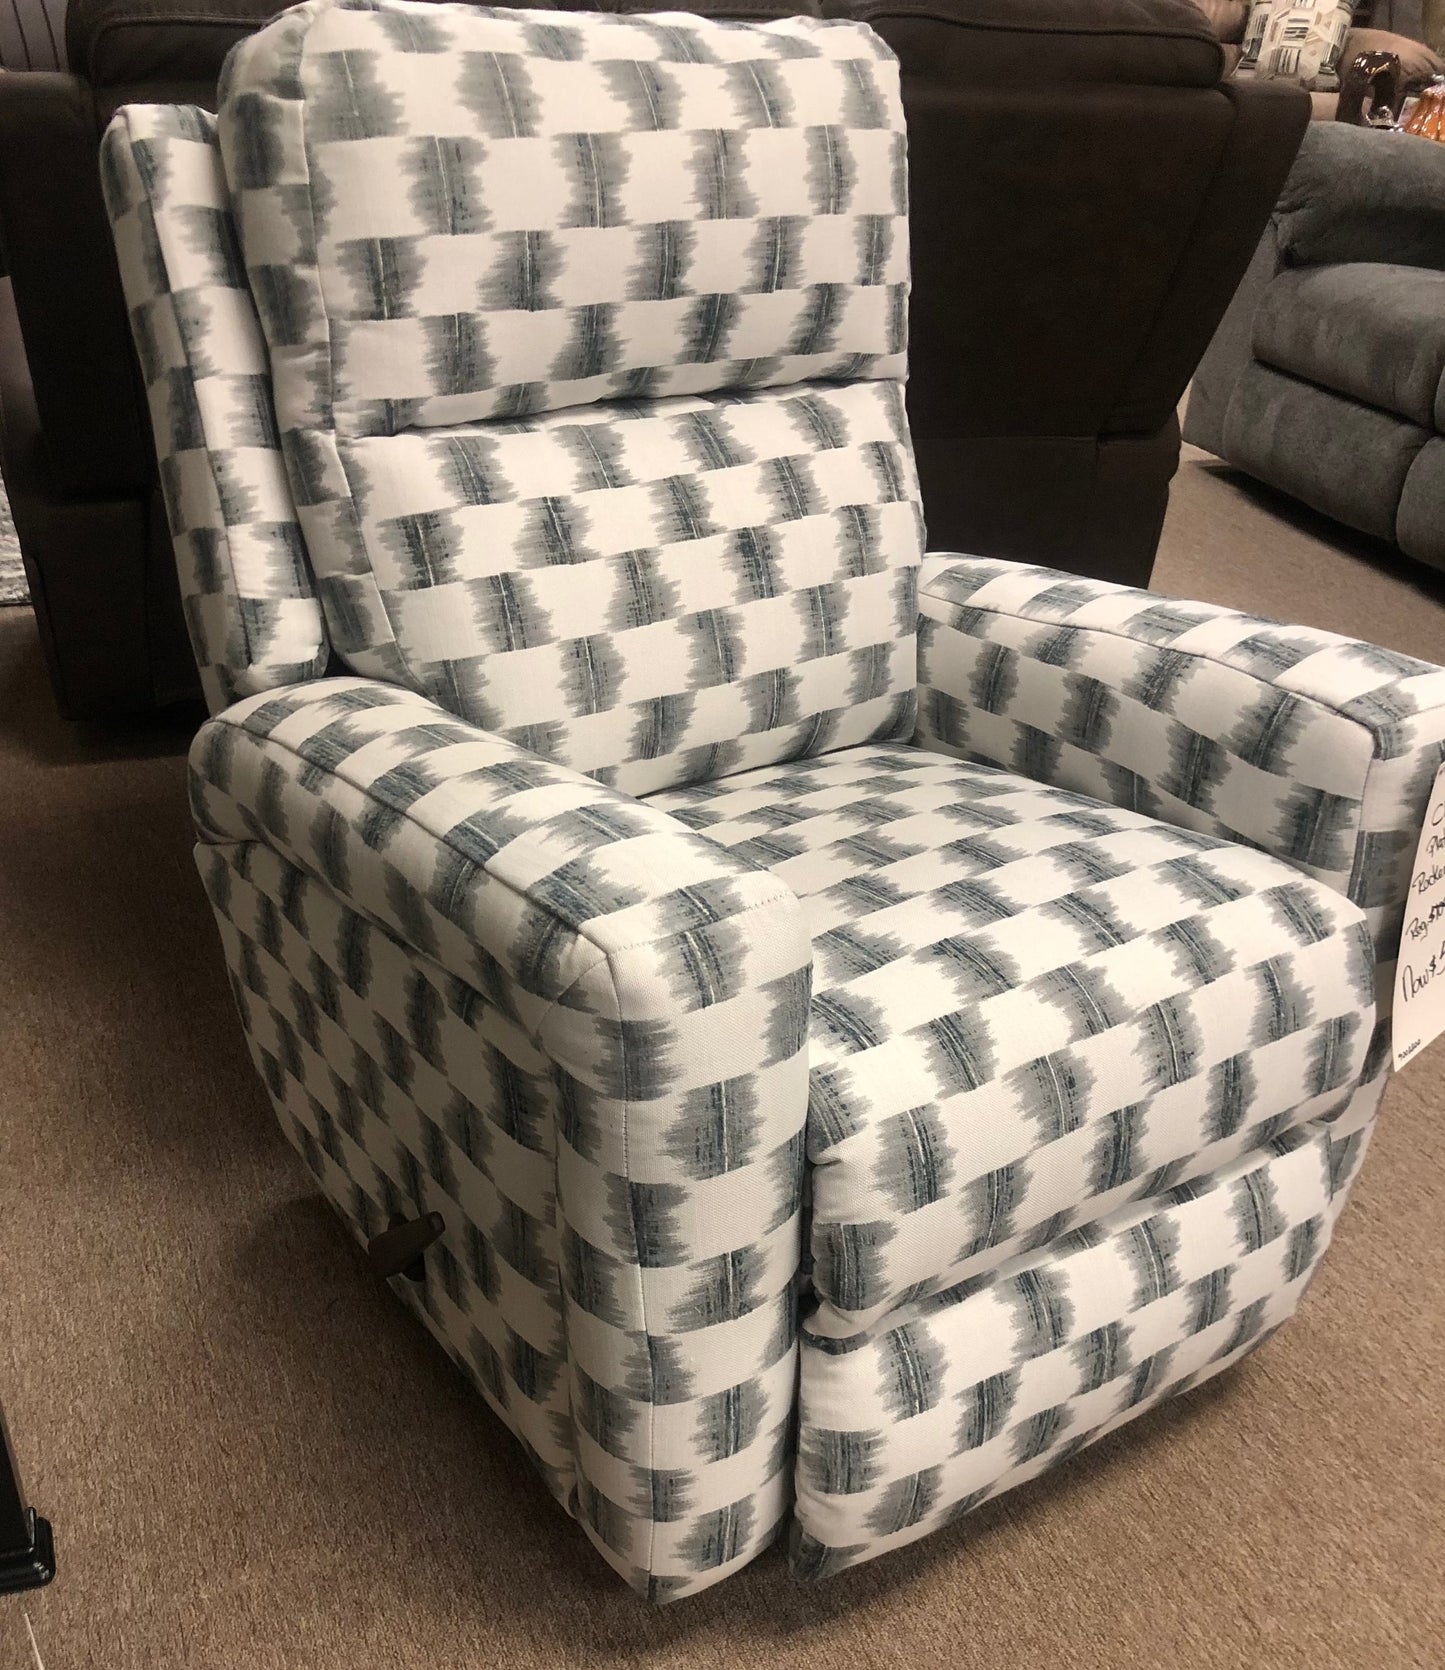 Rocker recliner with handle on the side.